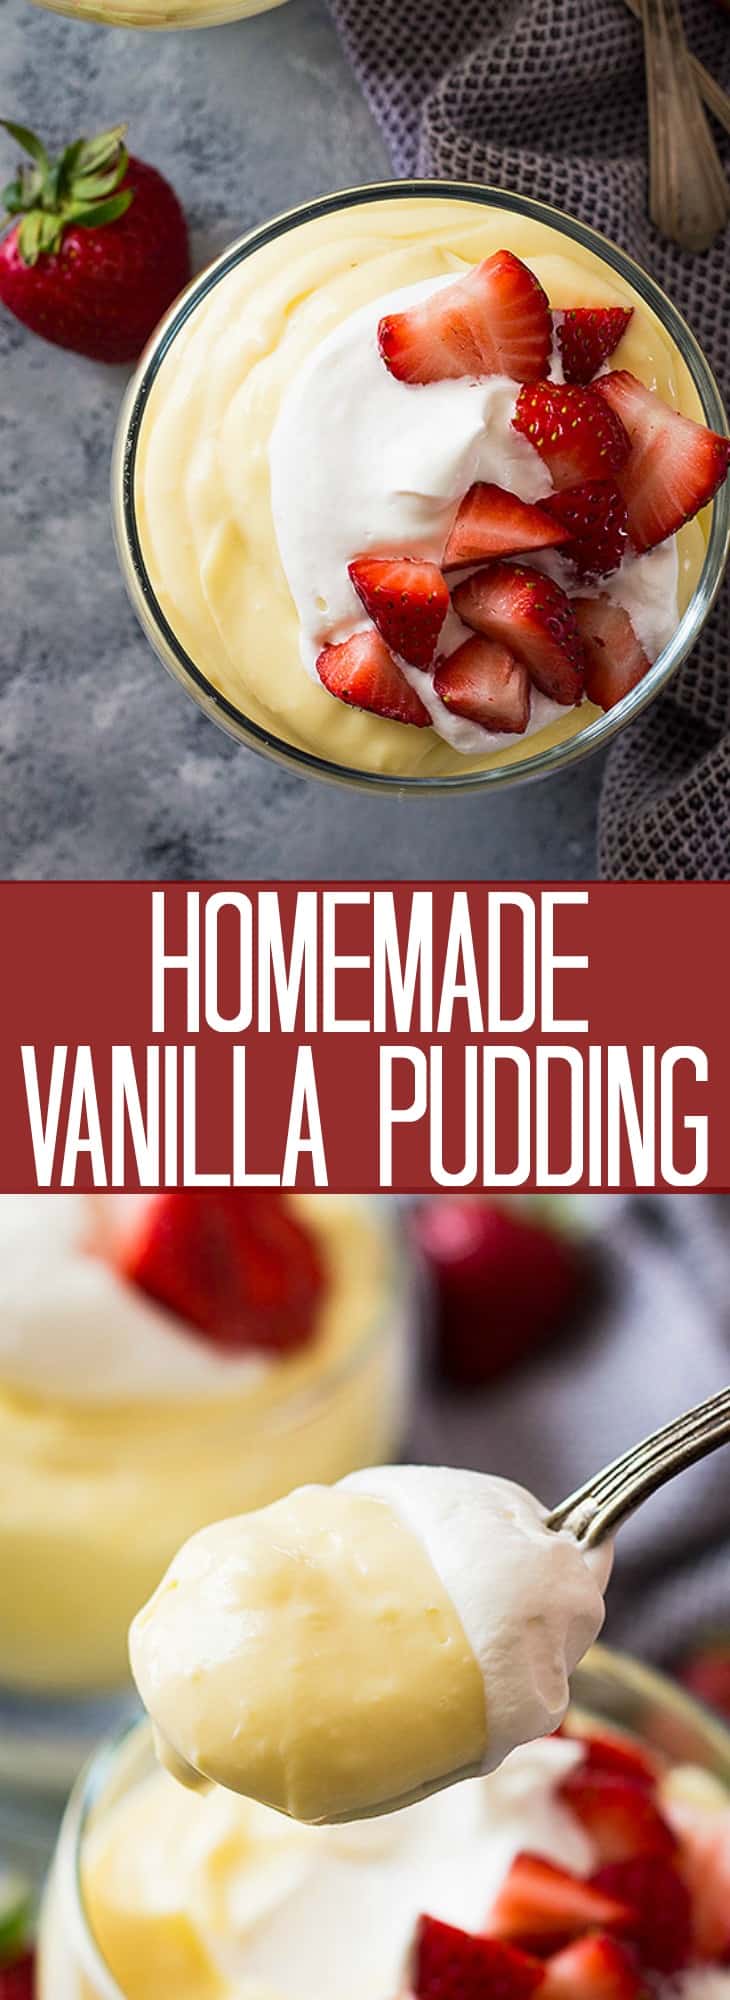 This Homemade Vanilla Pudding is a simple dessert to make. Dress it up with some cut fruit and homemade whipped cream for an extra special treat!